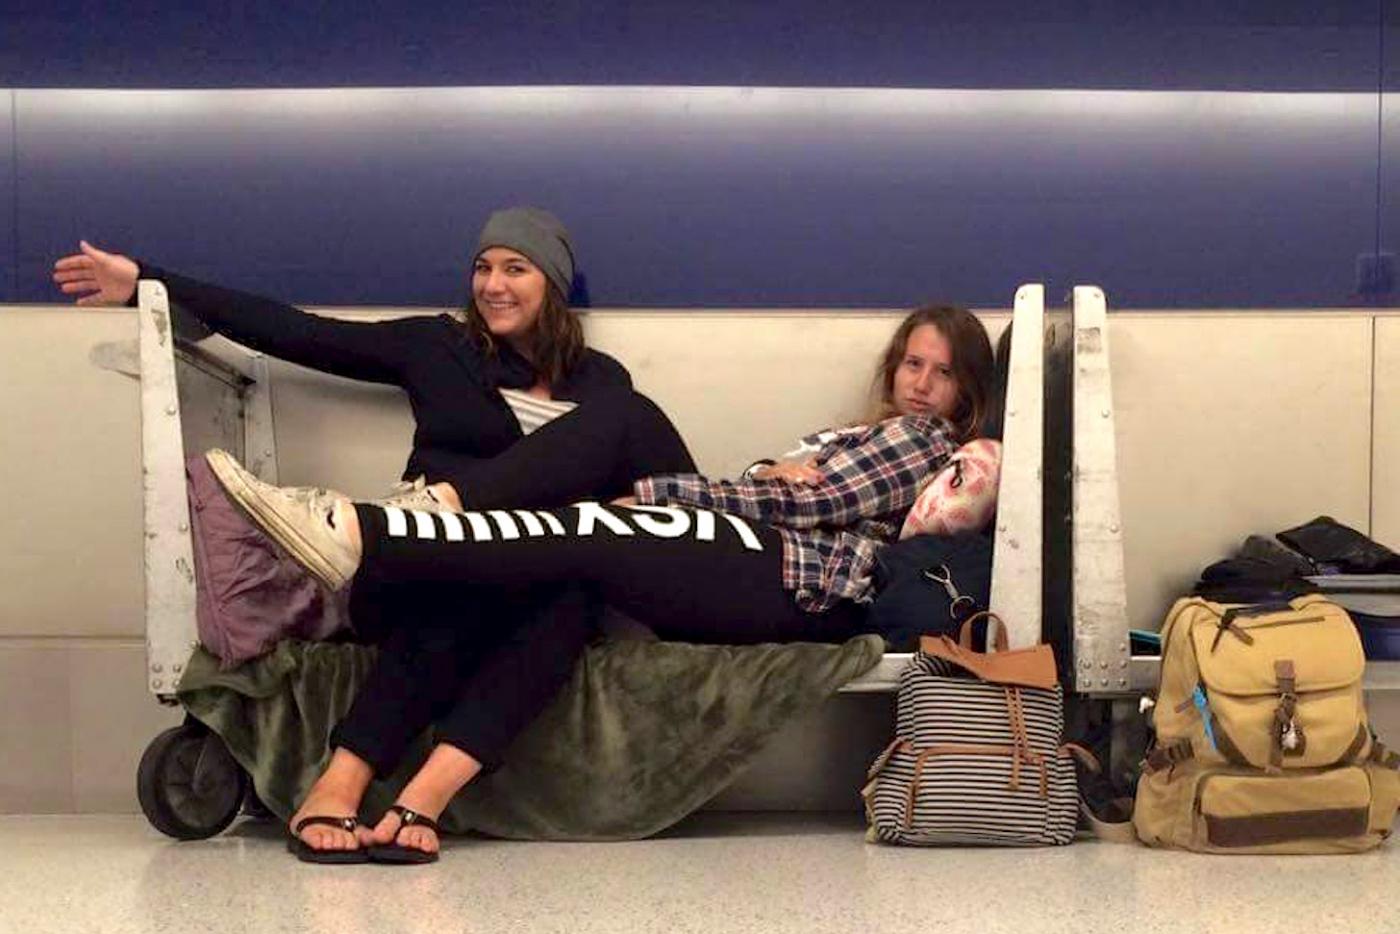 Krista and her new friend Kelly camp out at the airport.